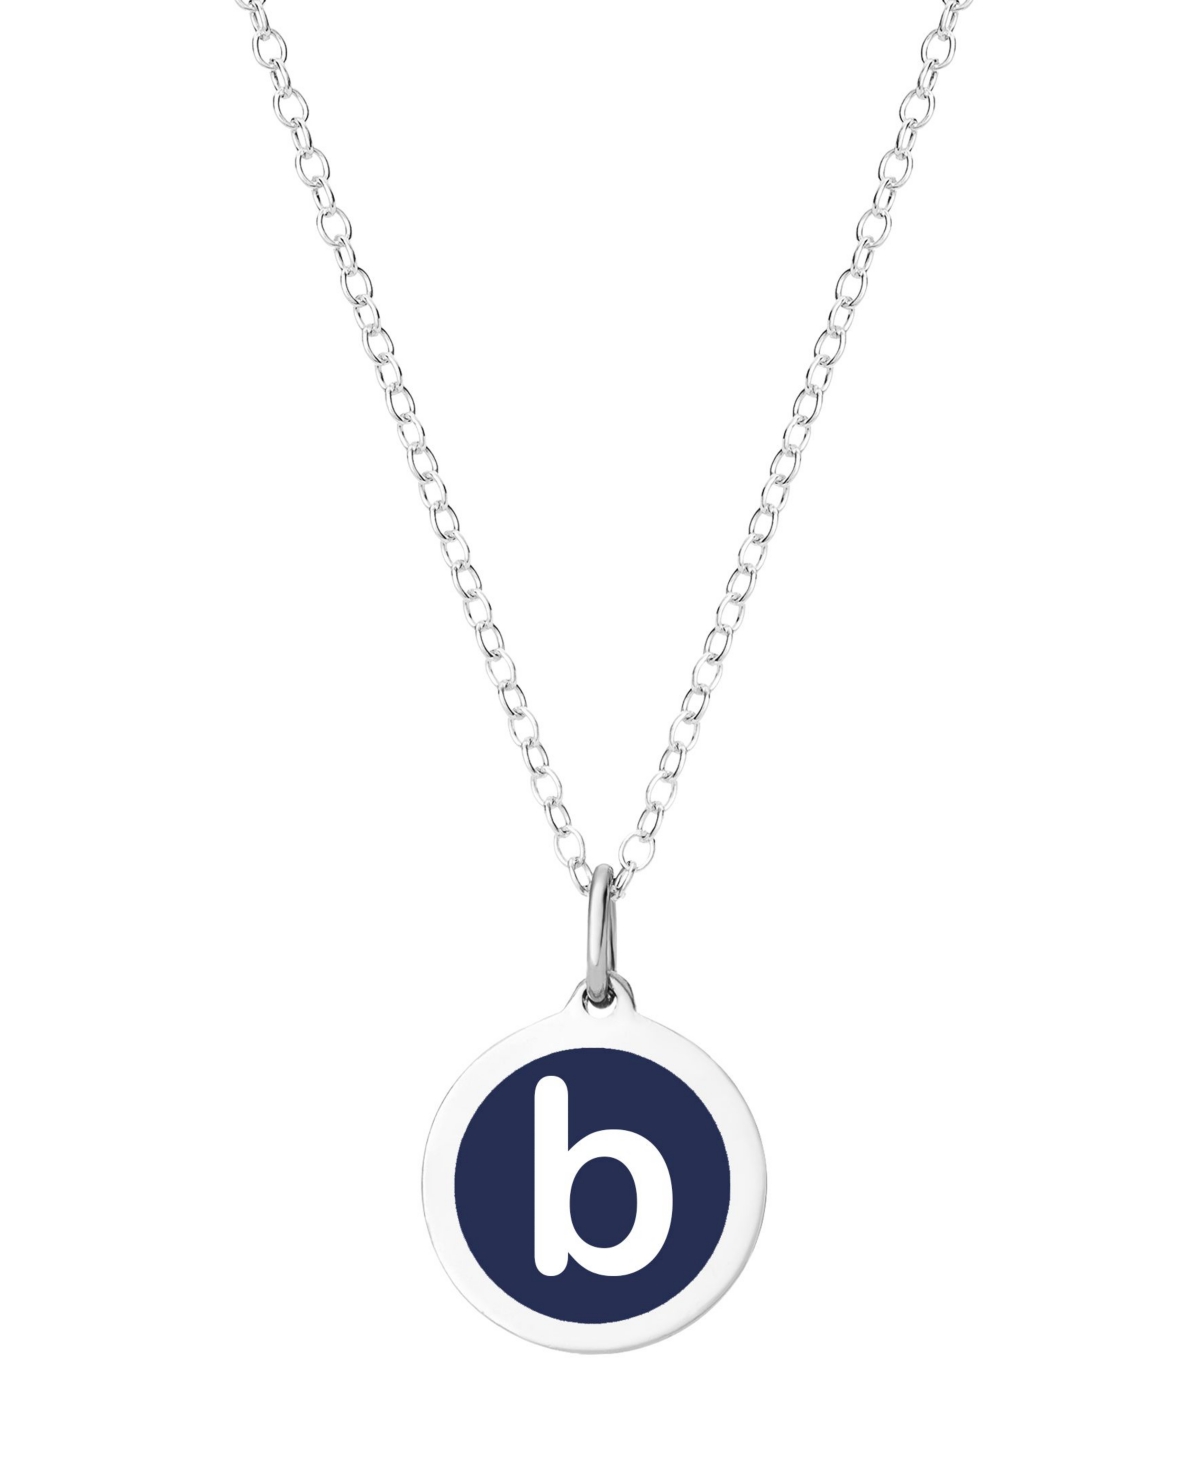 Auburn Jewelry Mini Initial Pendant Necklace in Sterling Silver and Navy Enamel, 16" + 2" Extender